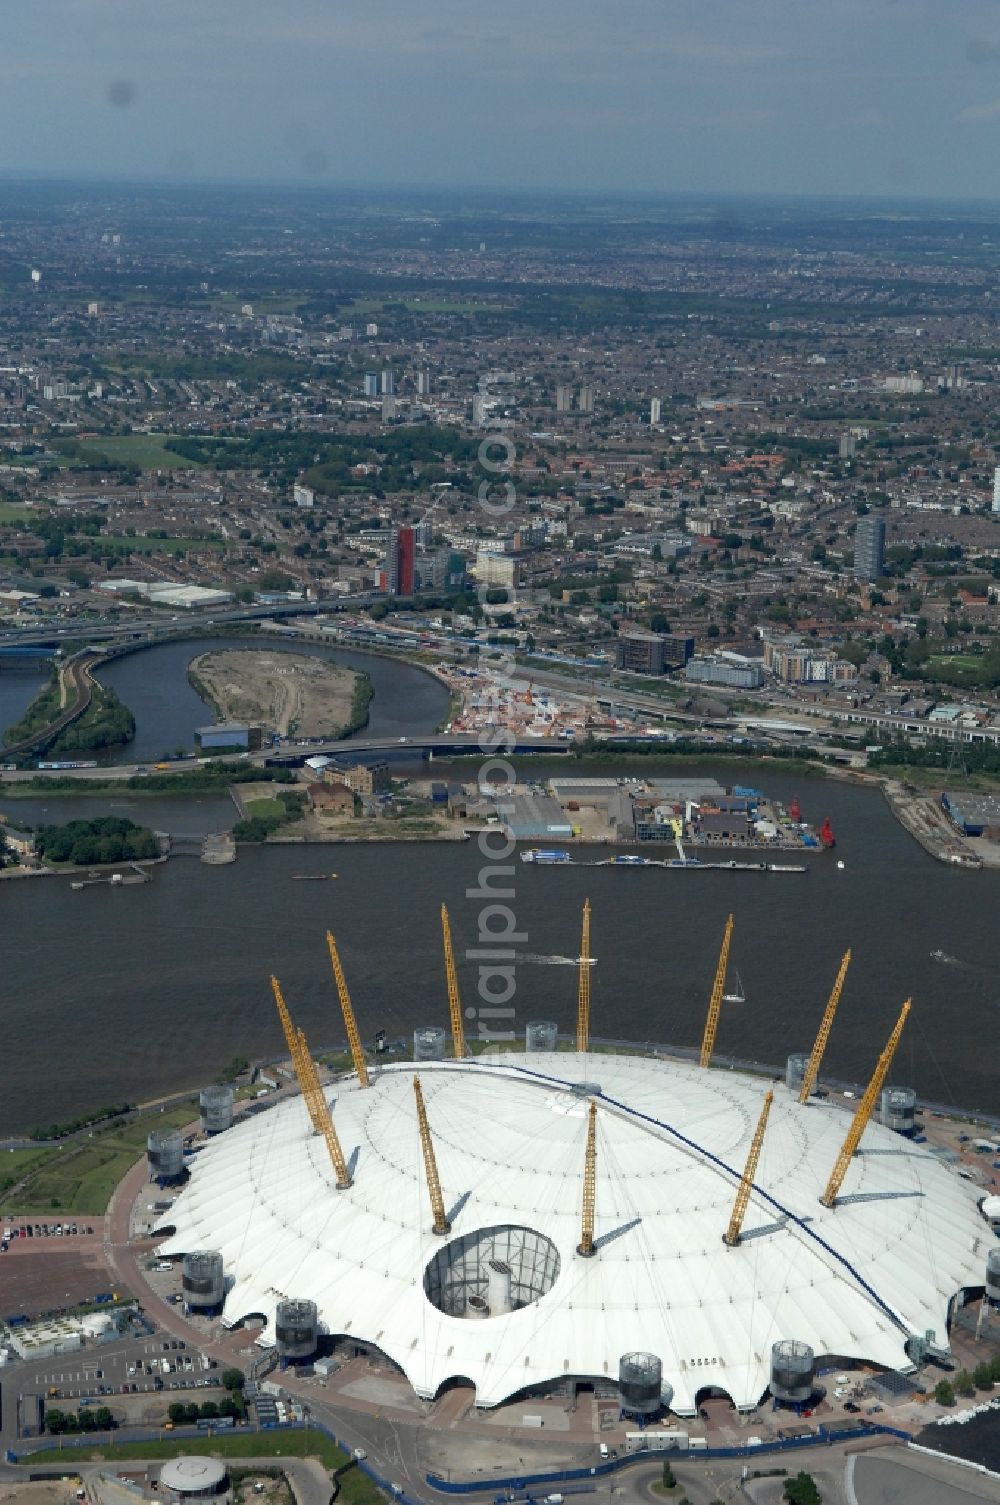 London from the bird's eye view: The O2 Arena is a multi-purpose indoor arena and large entertainment complex on the Greenwich peninsula and one of the Olympic and Paralympic venues for the 2012 Games in England, Great Britain